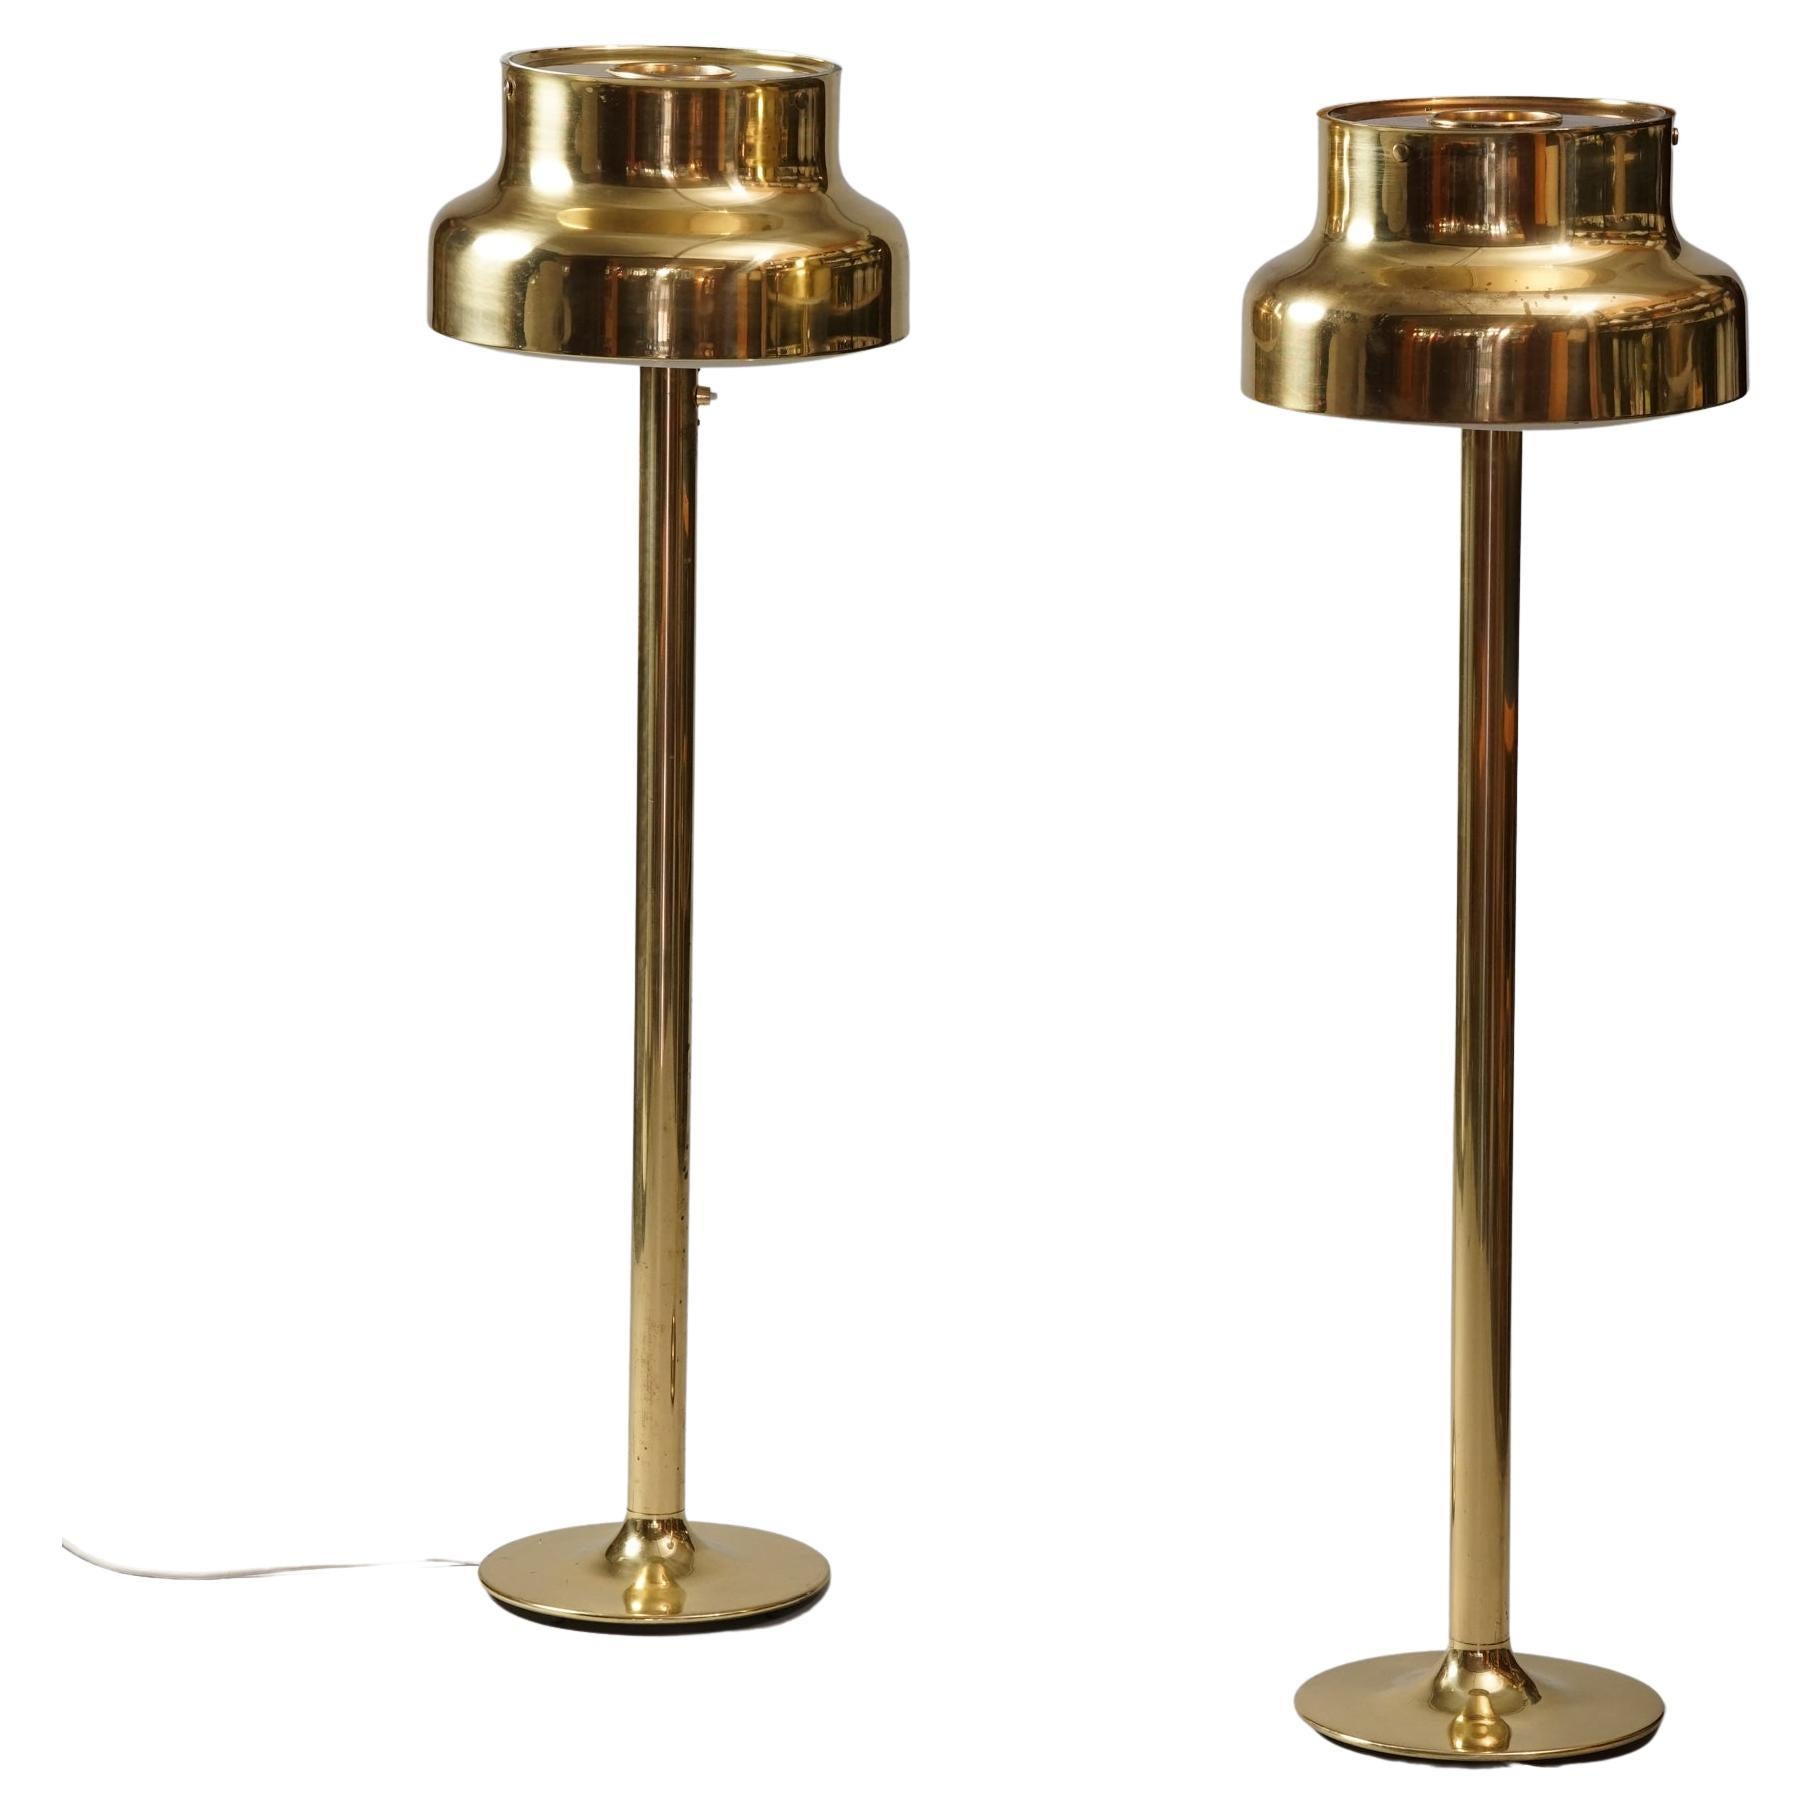 Set of Two Model Bumling Floor Lamps, Anders Pehrson, Ateljé Lyktan, 1950s/1960s For Sale